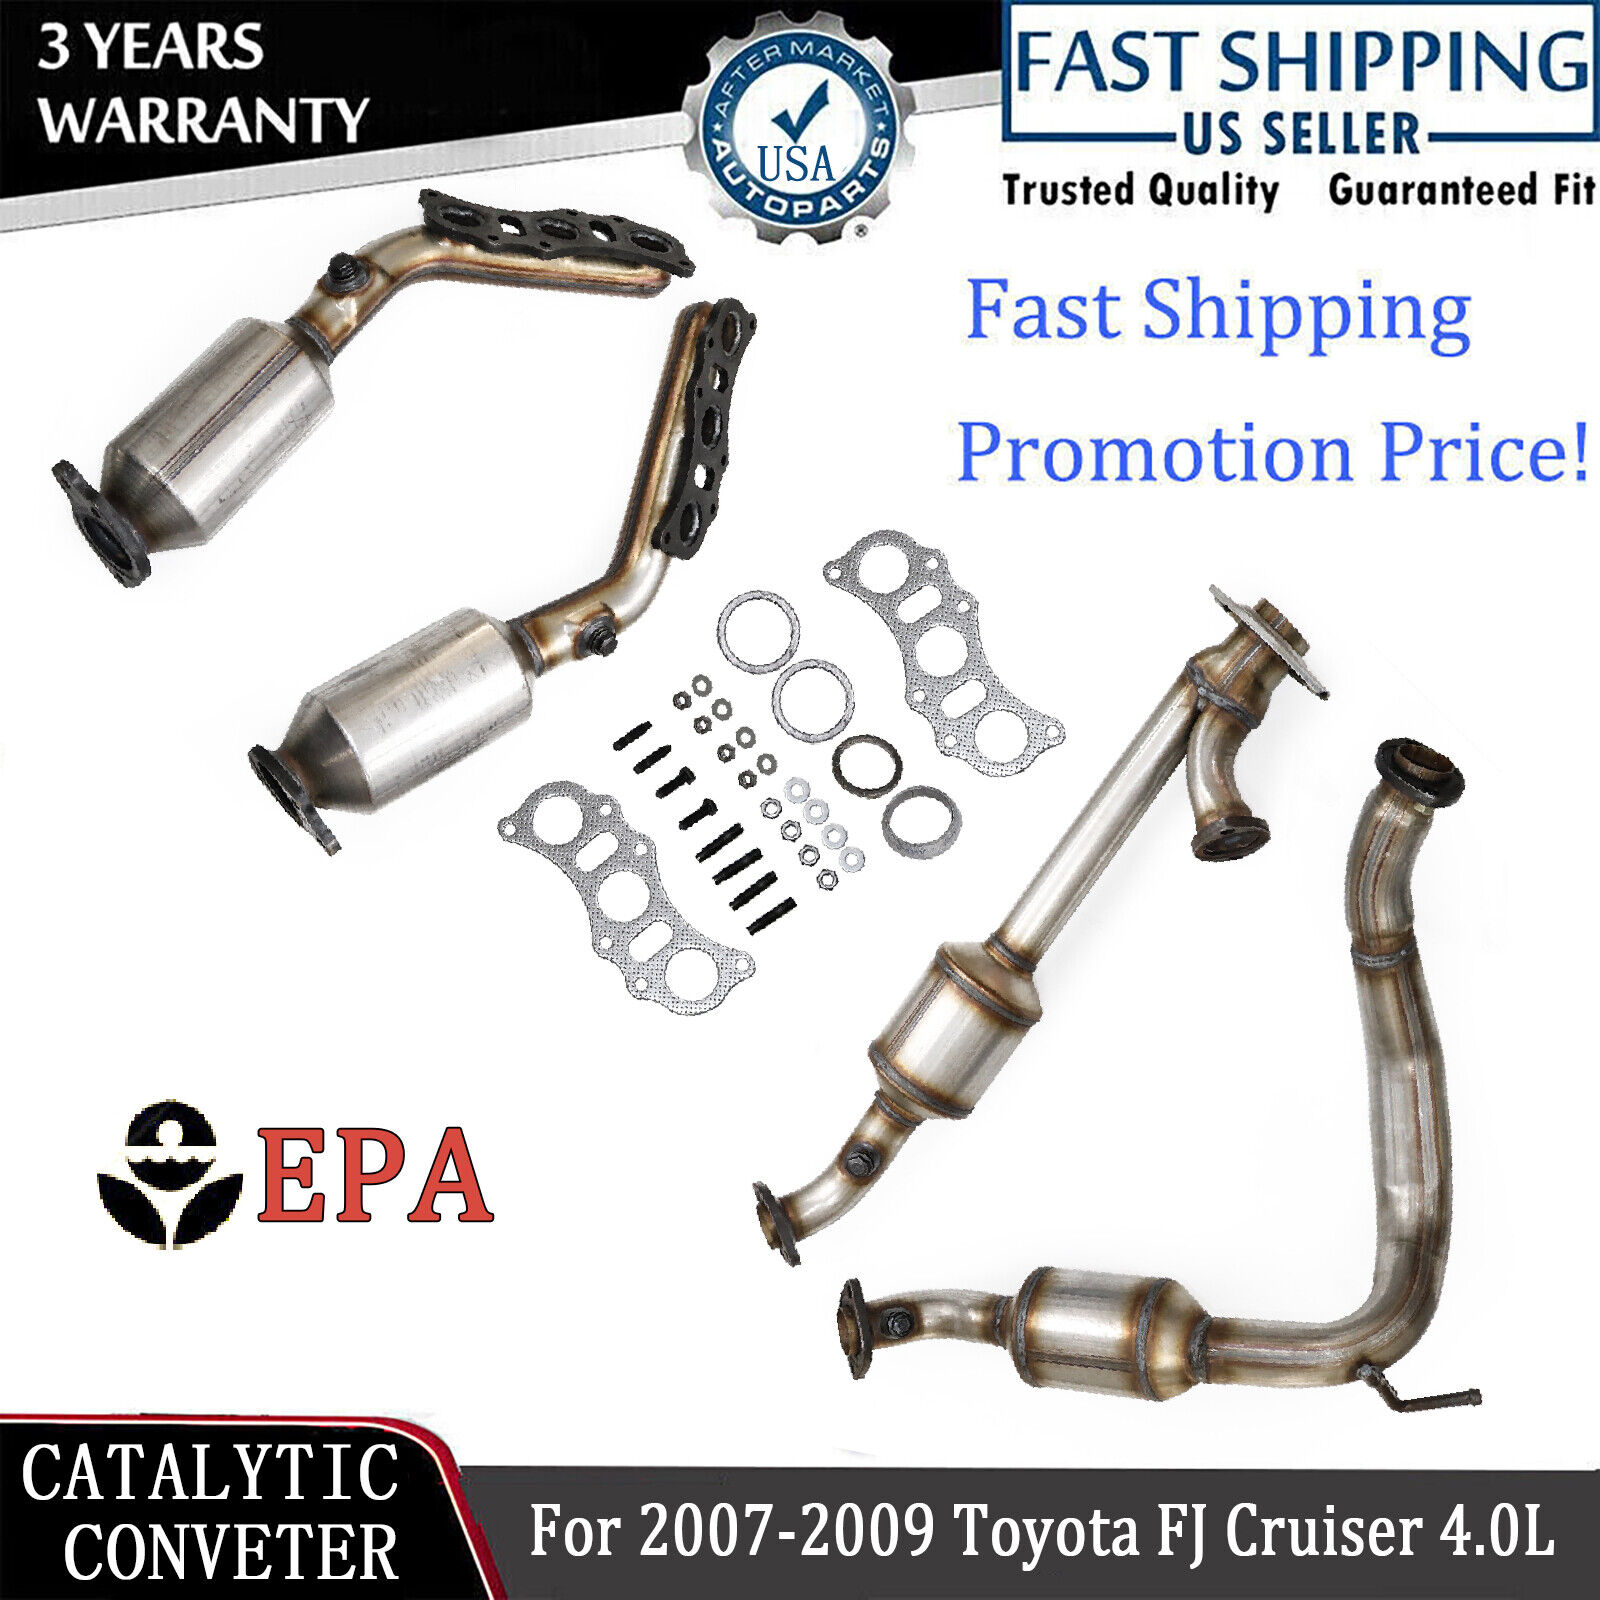 For 2007-2009 Toyota FJ CRUISER 4.0L ALL 4 Catalytic Converters Direct Fit OBDII